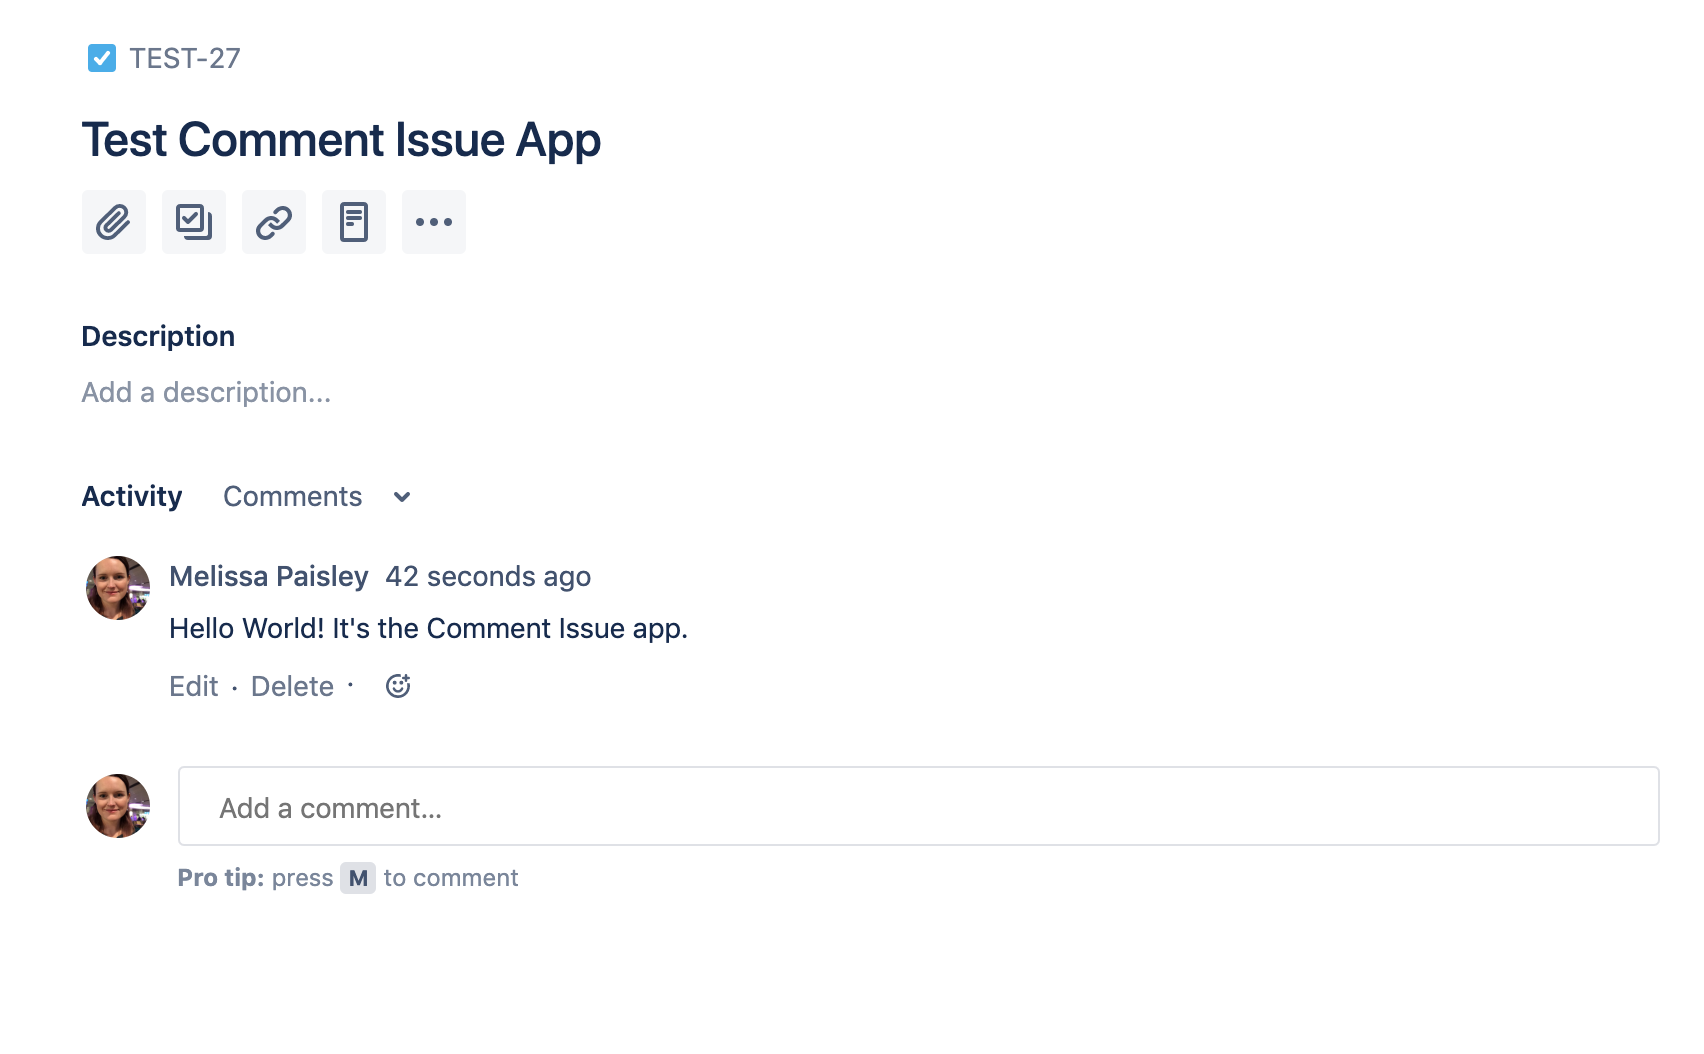 The final app displays on a Jira issue